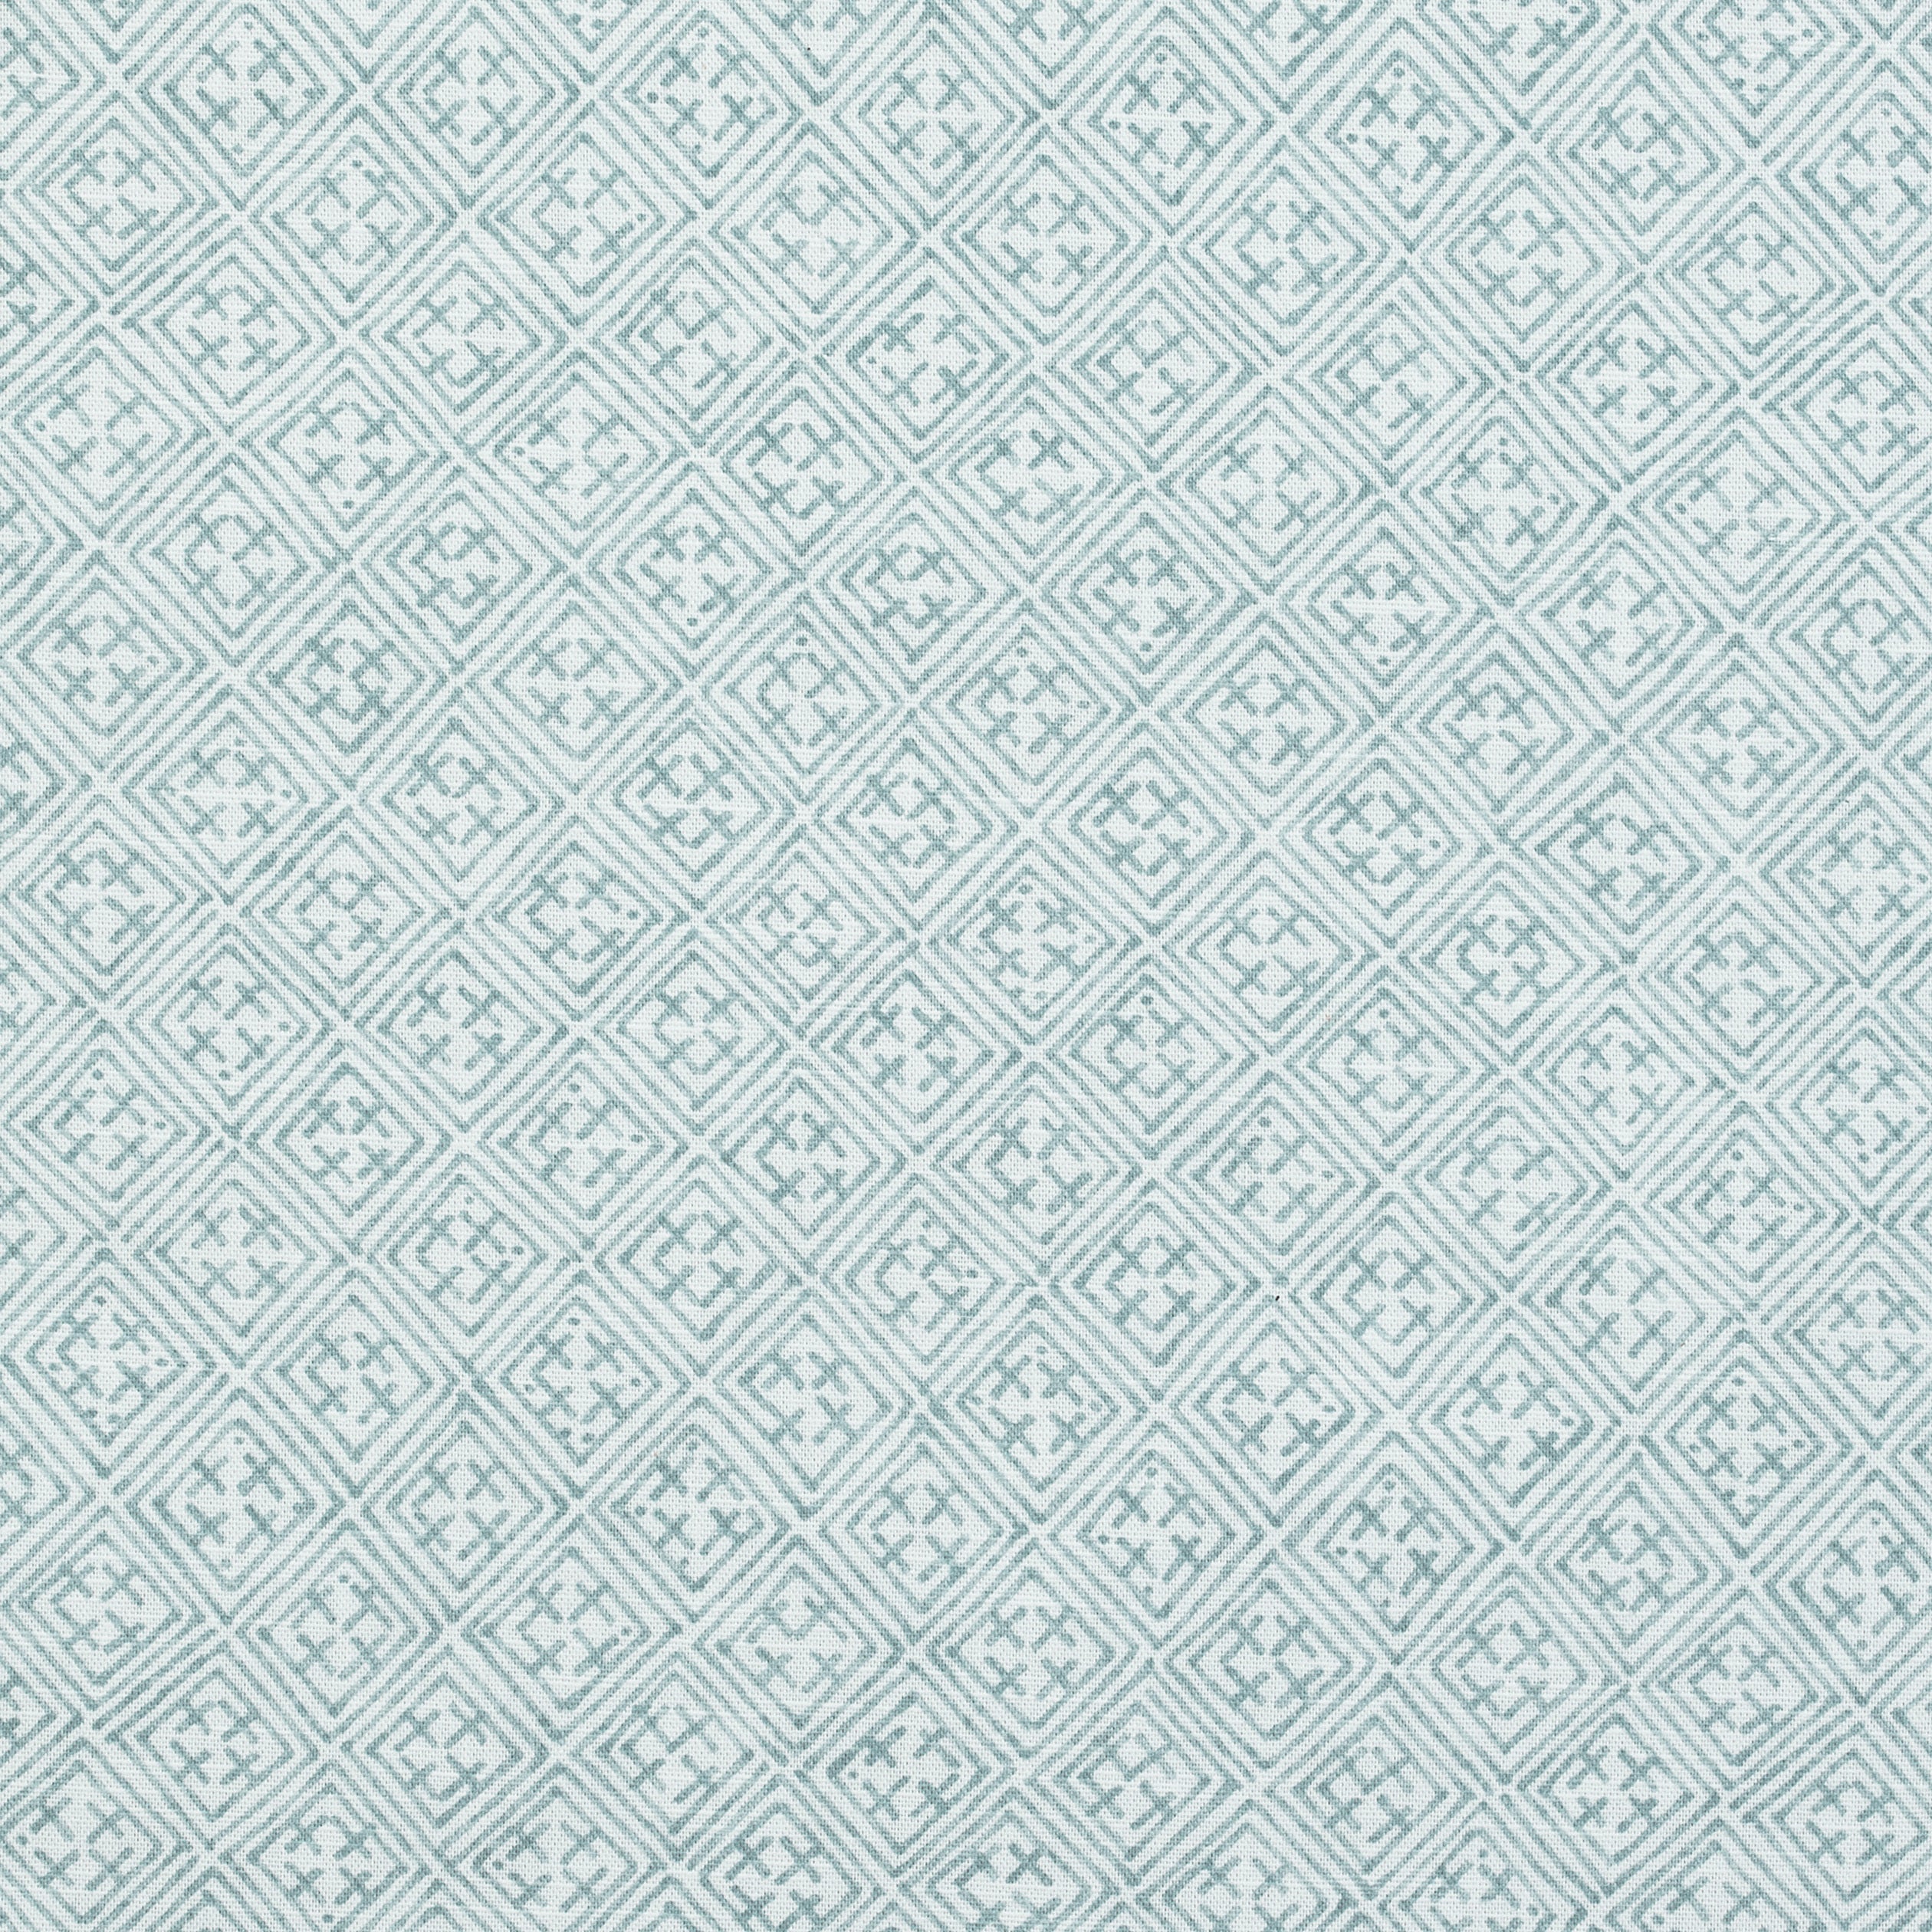 Laos fabric in aqua color - pattern number F972614 - by Thibaut in the Chestnut Hill collection